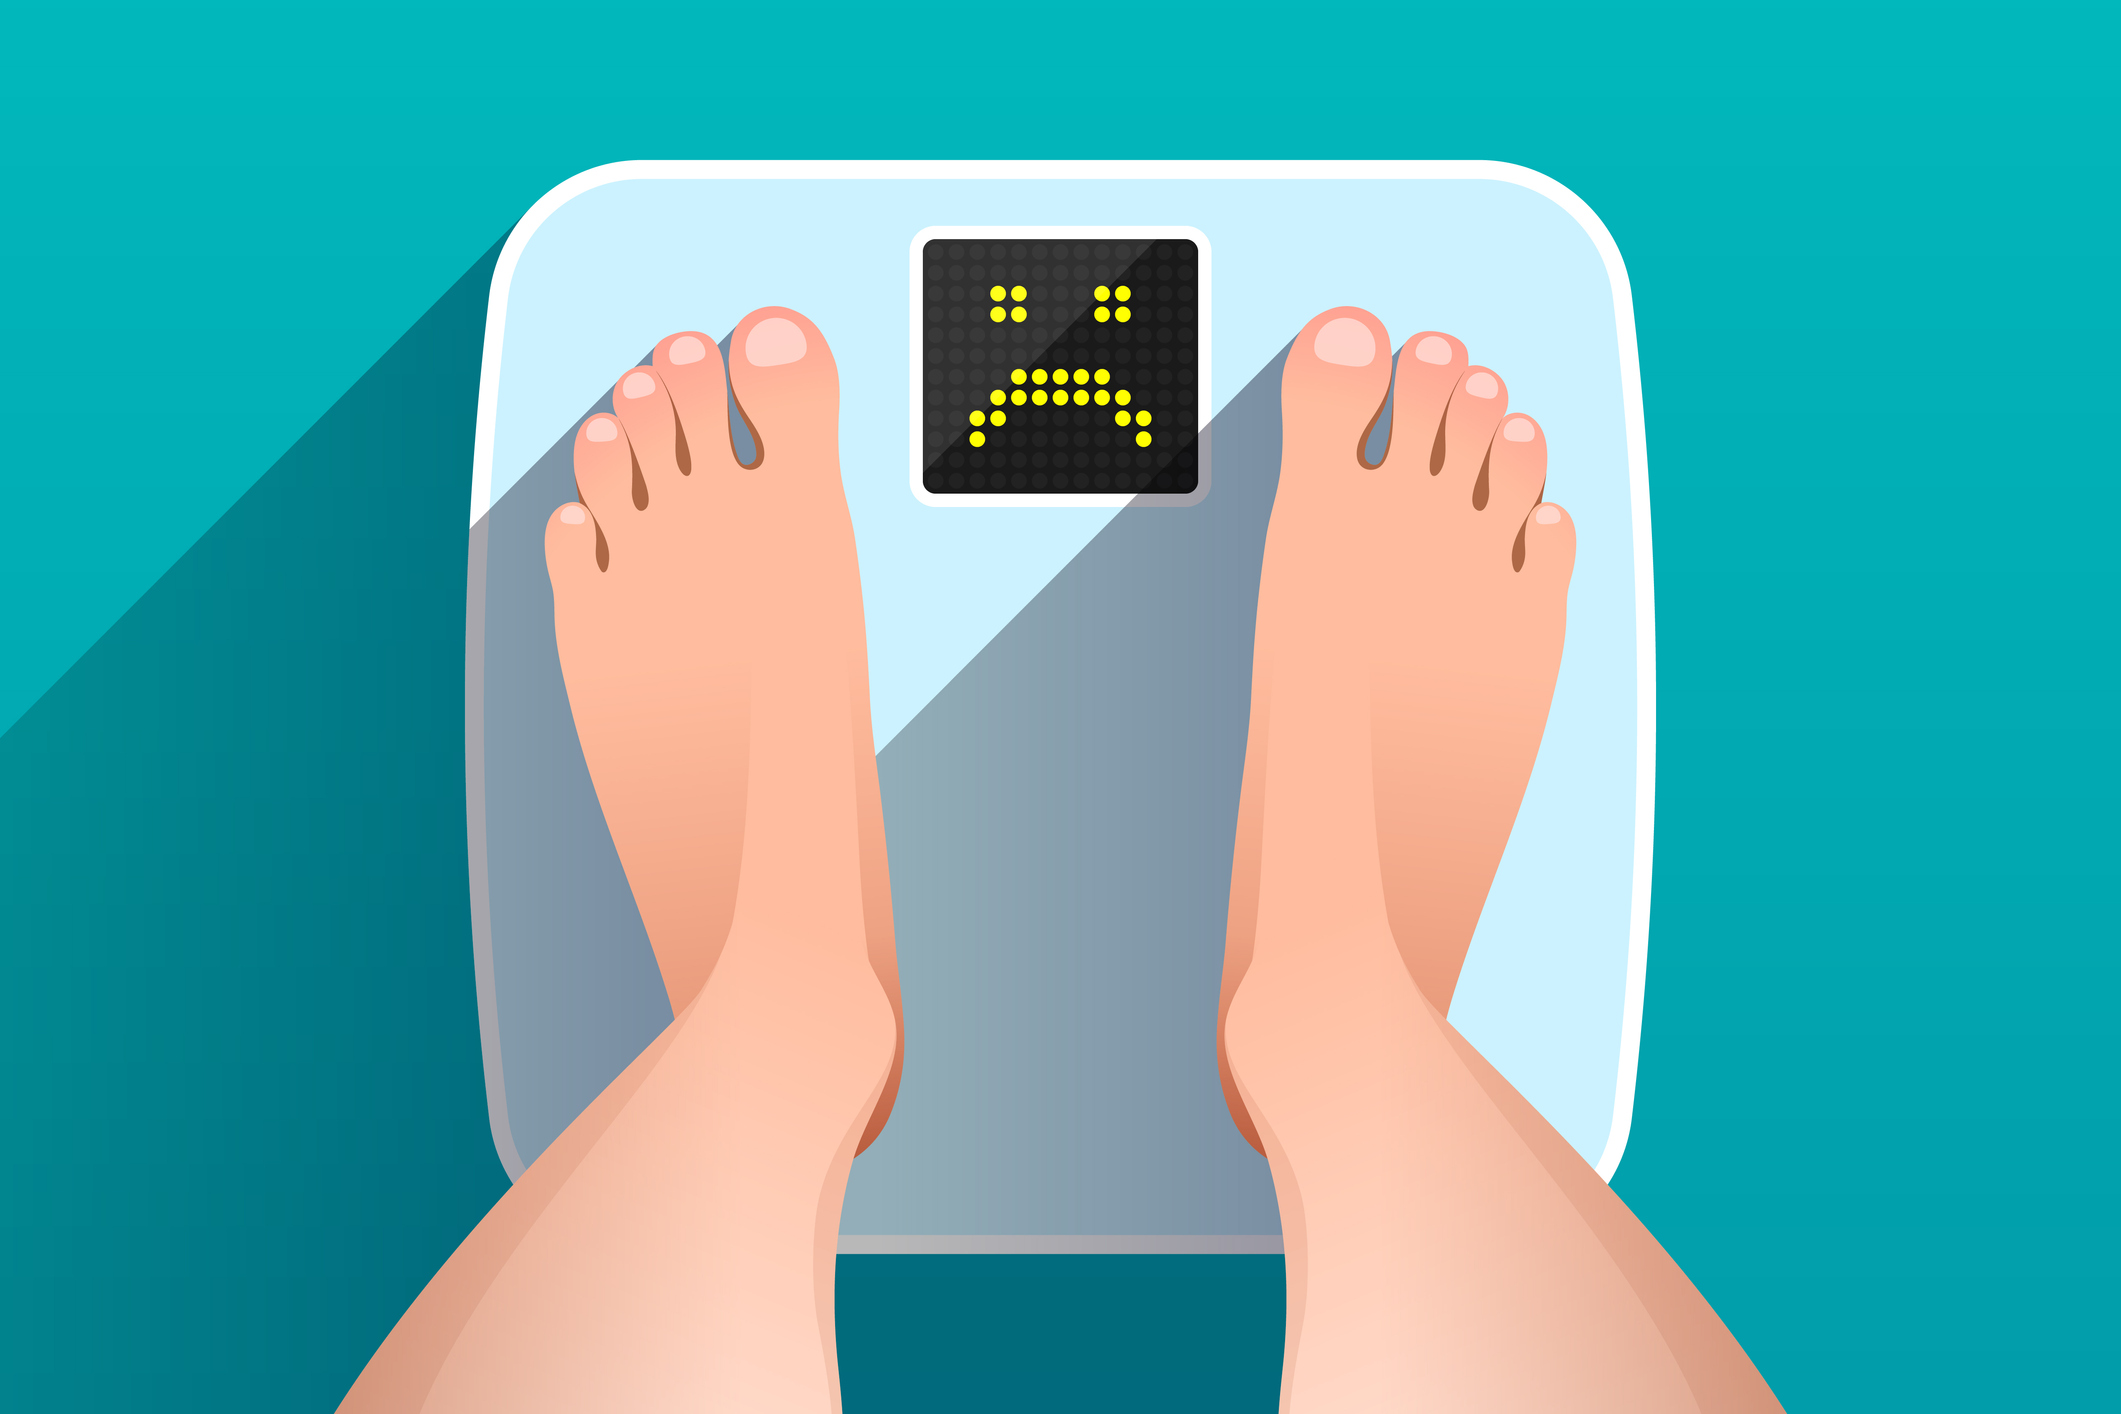 Woman is standing on bathroom scales with unhappy sad face on display, over colored background, top view of feet. Weight measurement and control. Concept of healthy lifestyle, dieting and fitness